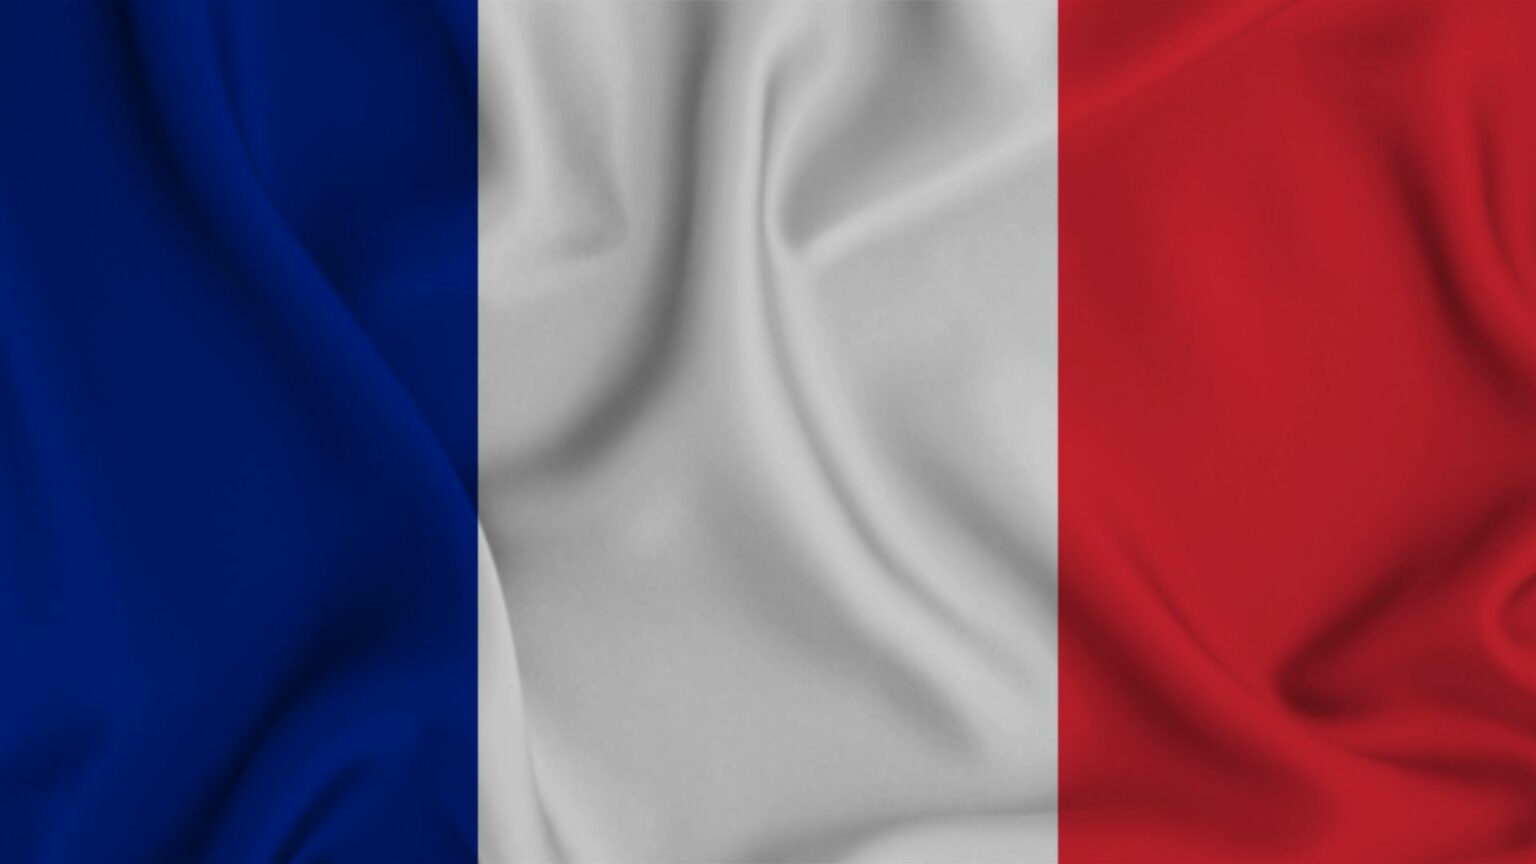 France Issues Tender for Hydrogen Engineering Services to Enhance Safety and Compliance